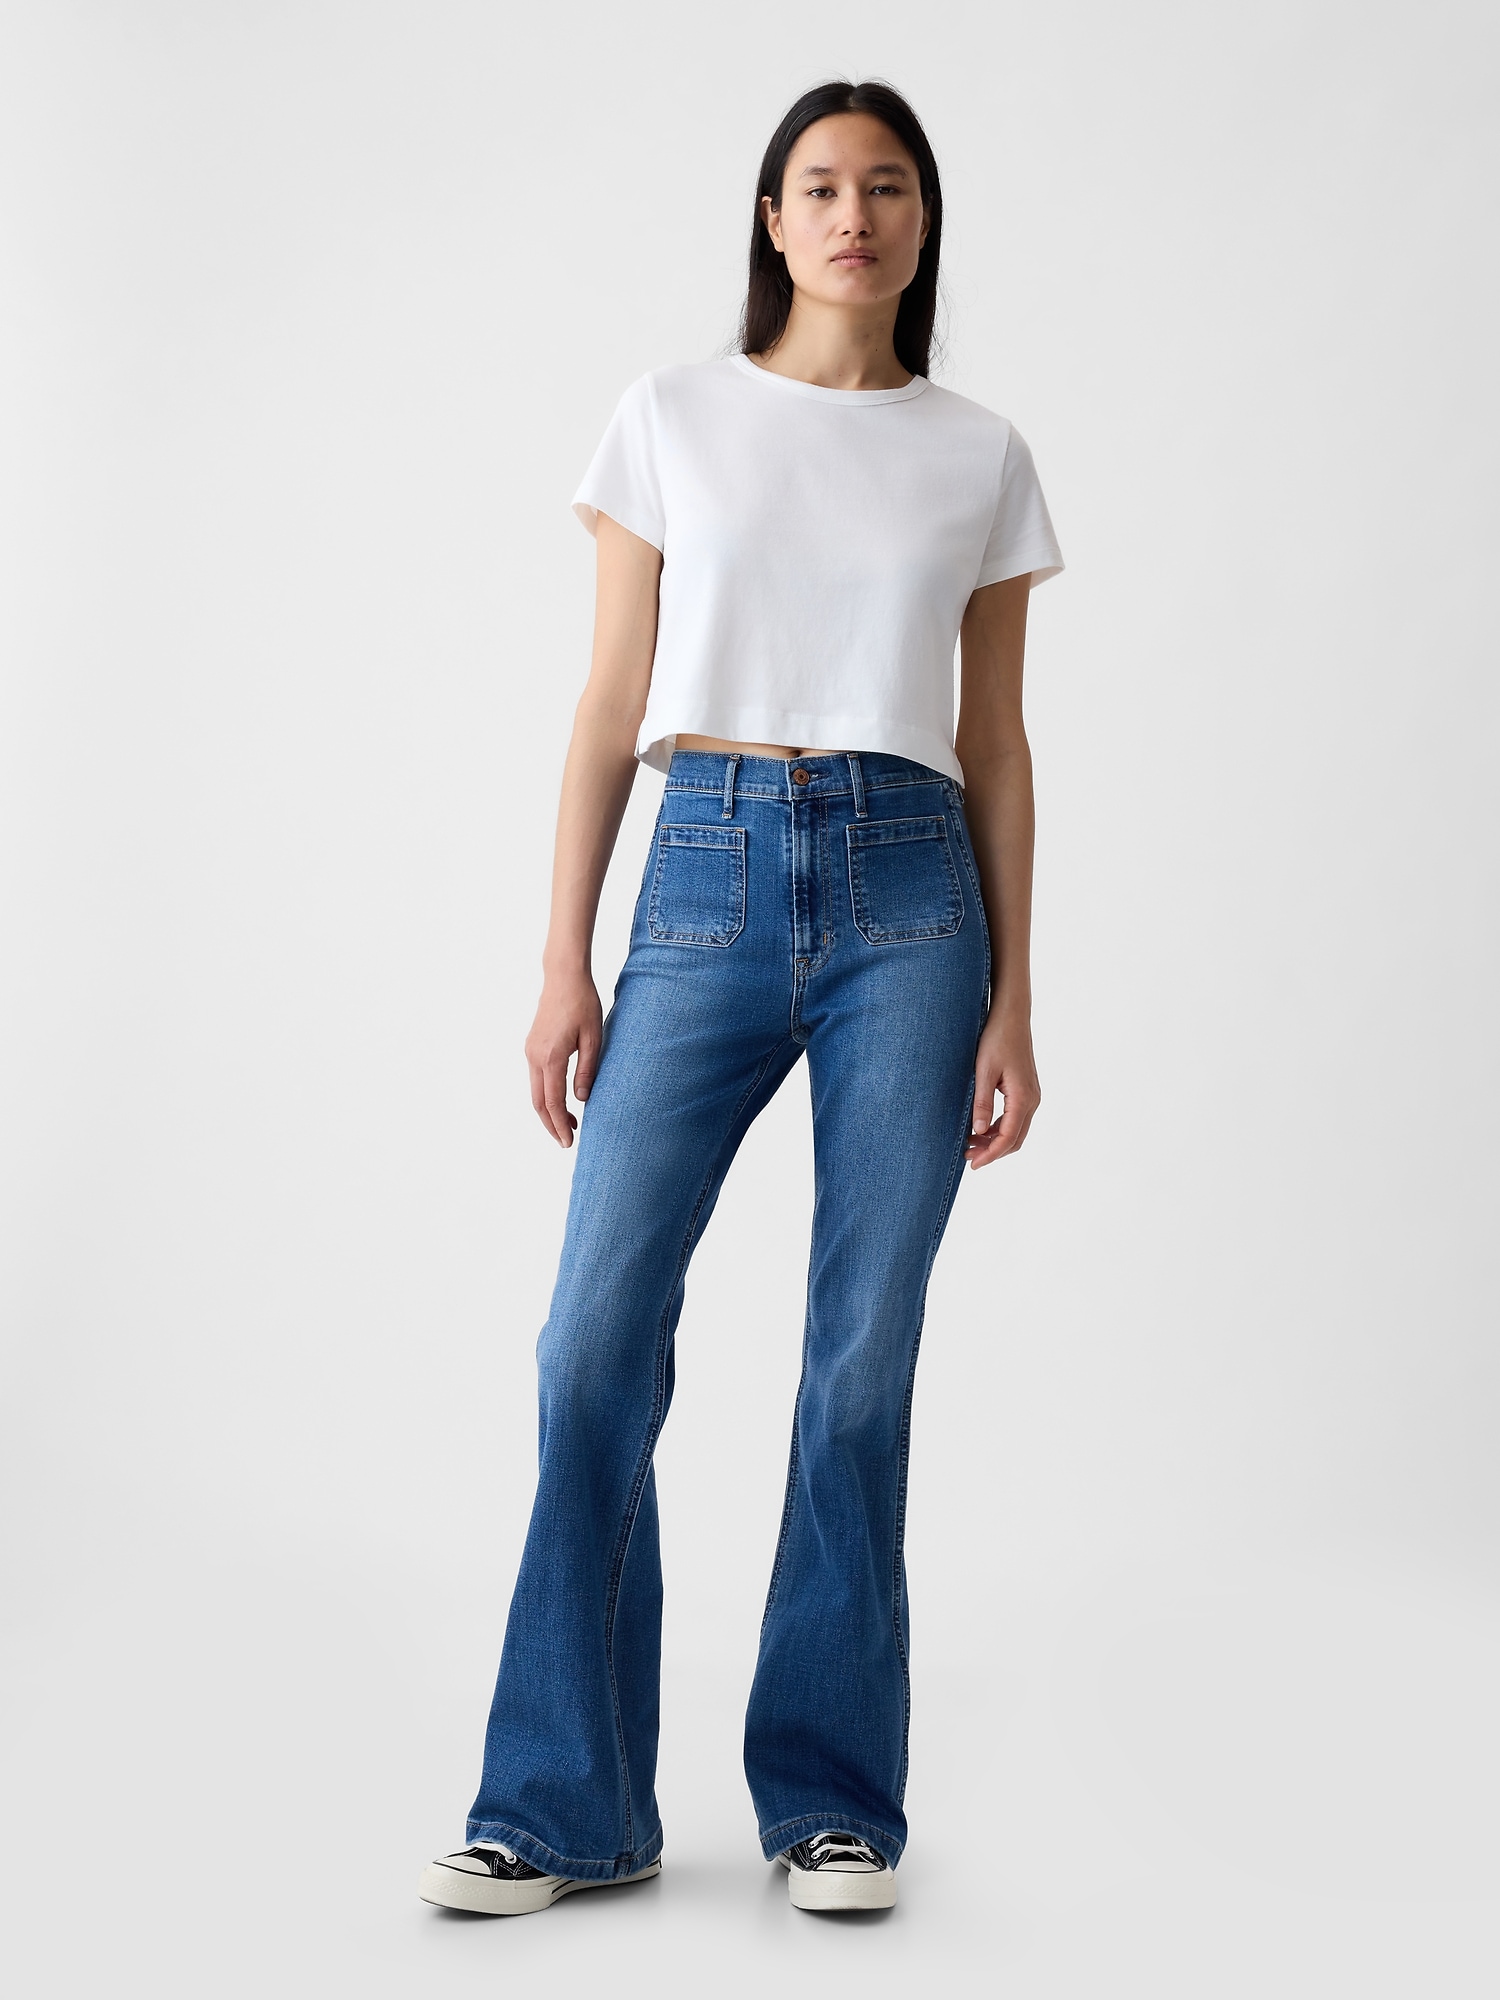 70's High Rise Flare Women's Jeans - Light Wash